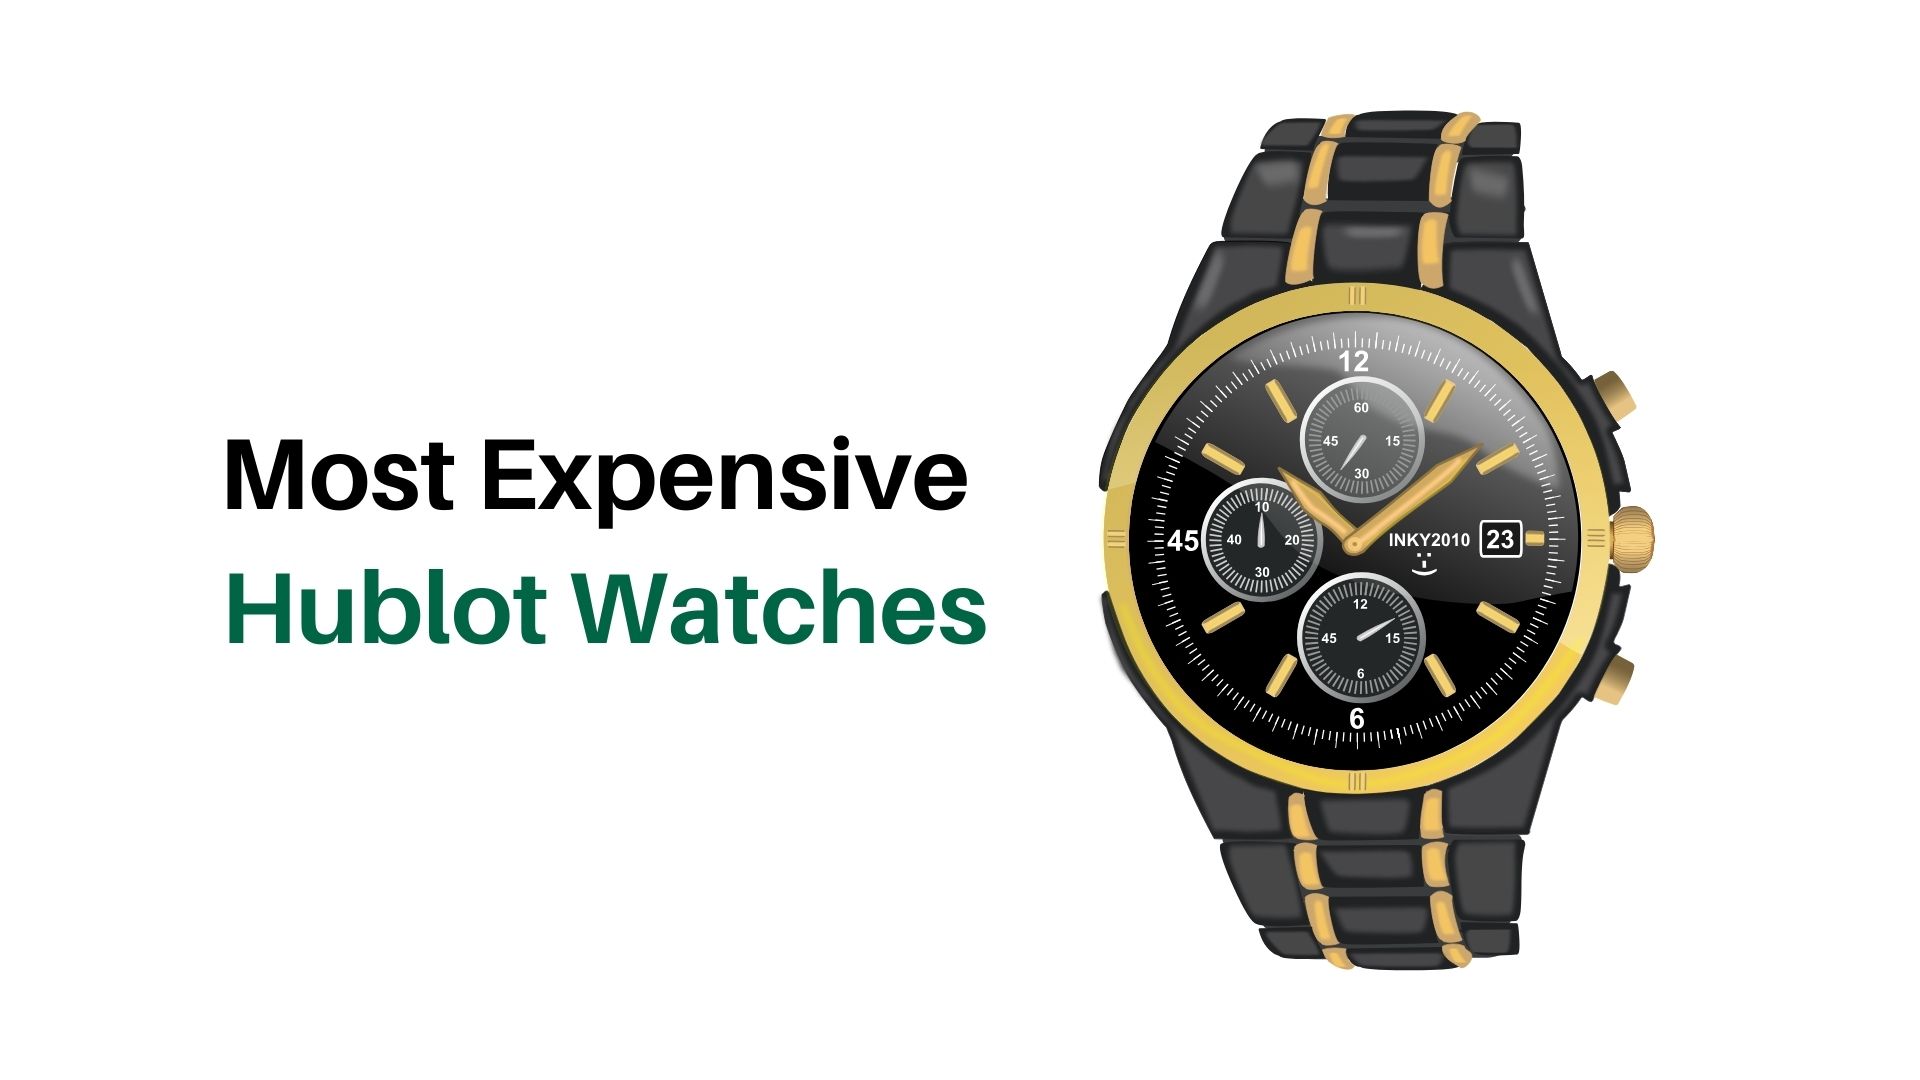 Top 10 Most Expensive Hublot Watches In The World